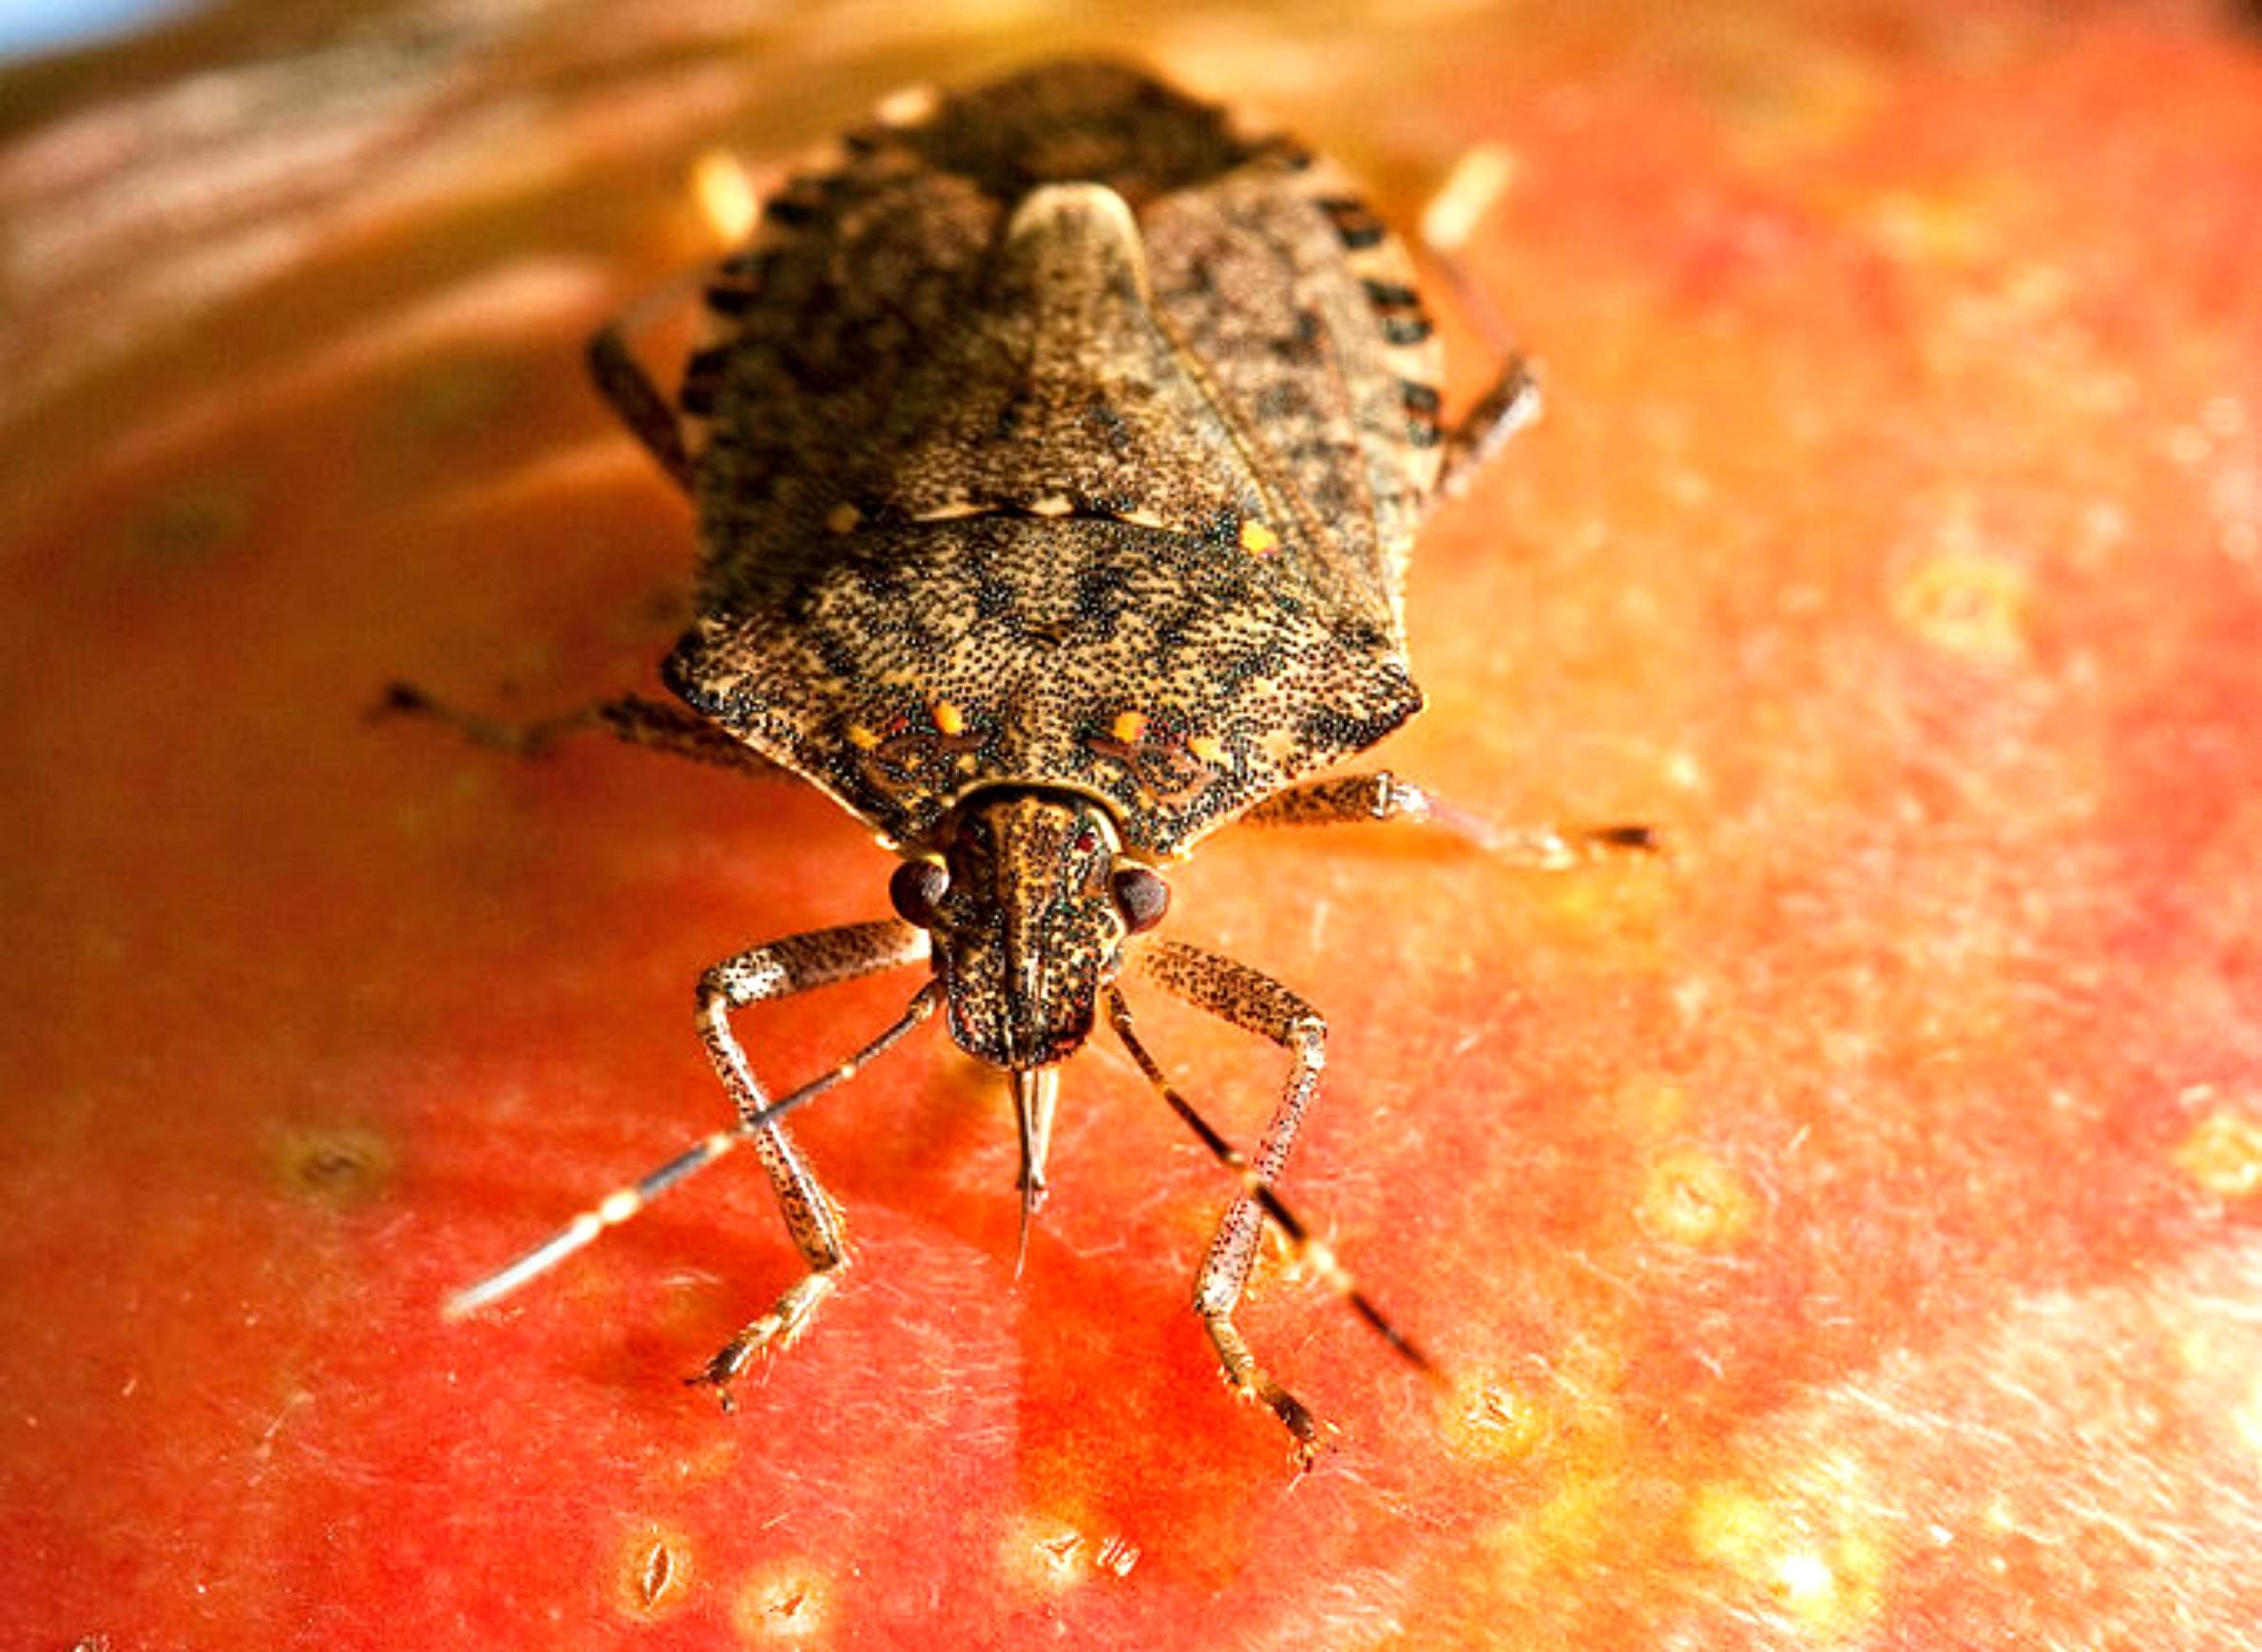 Brown marmorated stink bug on an apple